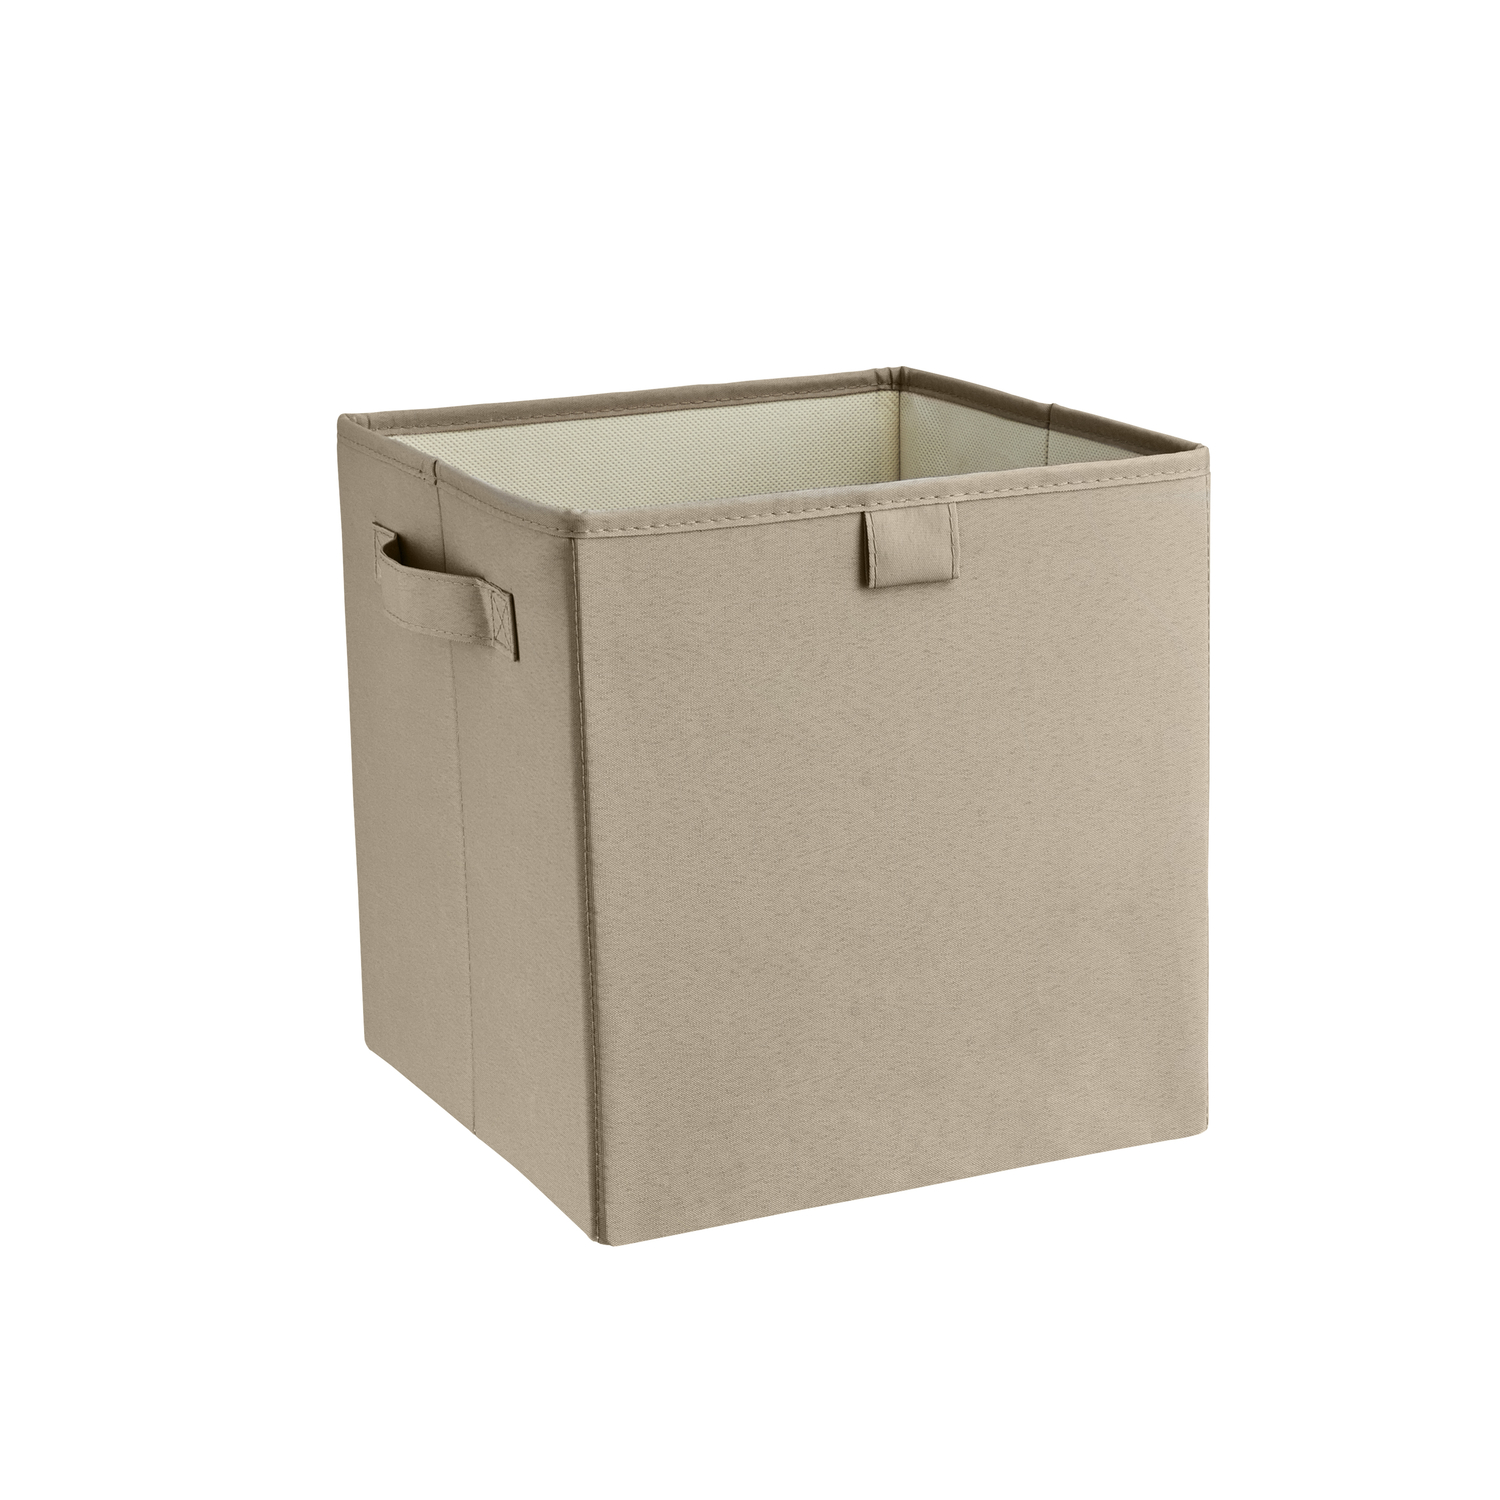 UPC 075381160803 product image for ClosetMaid 11 in. H x 10.5 in. W x 10.5 in. D Fabric Storage Bin | upcitemdb.com